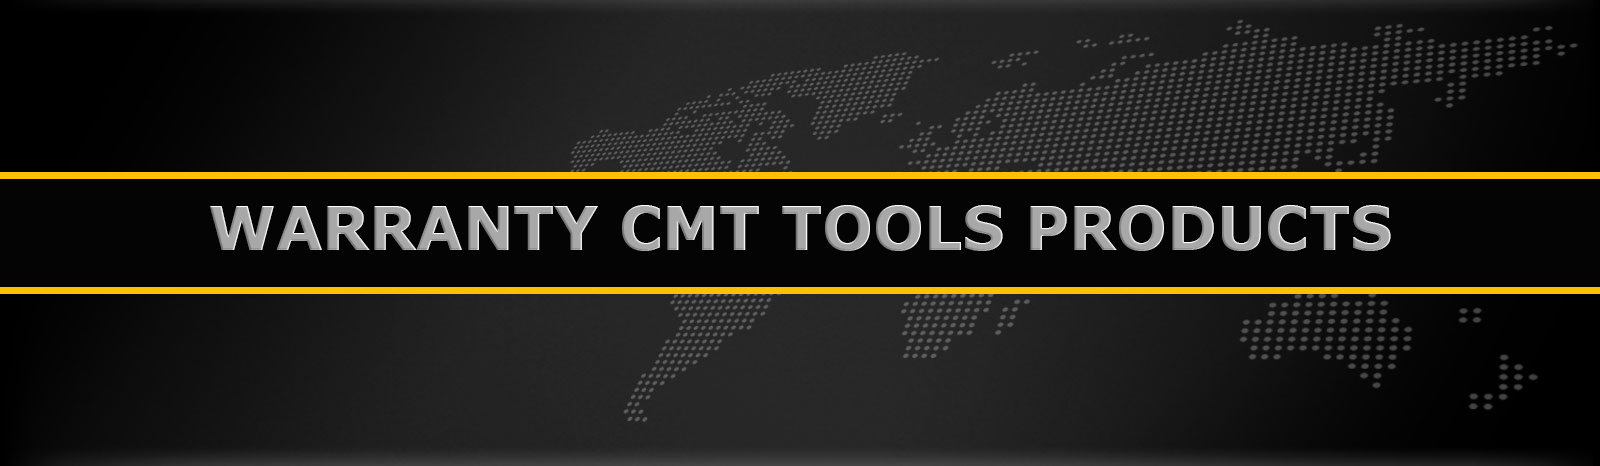 warranty cmt tools products